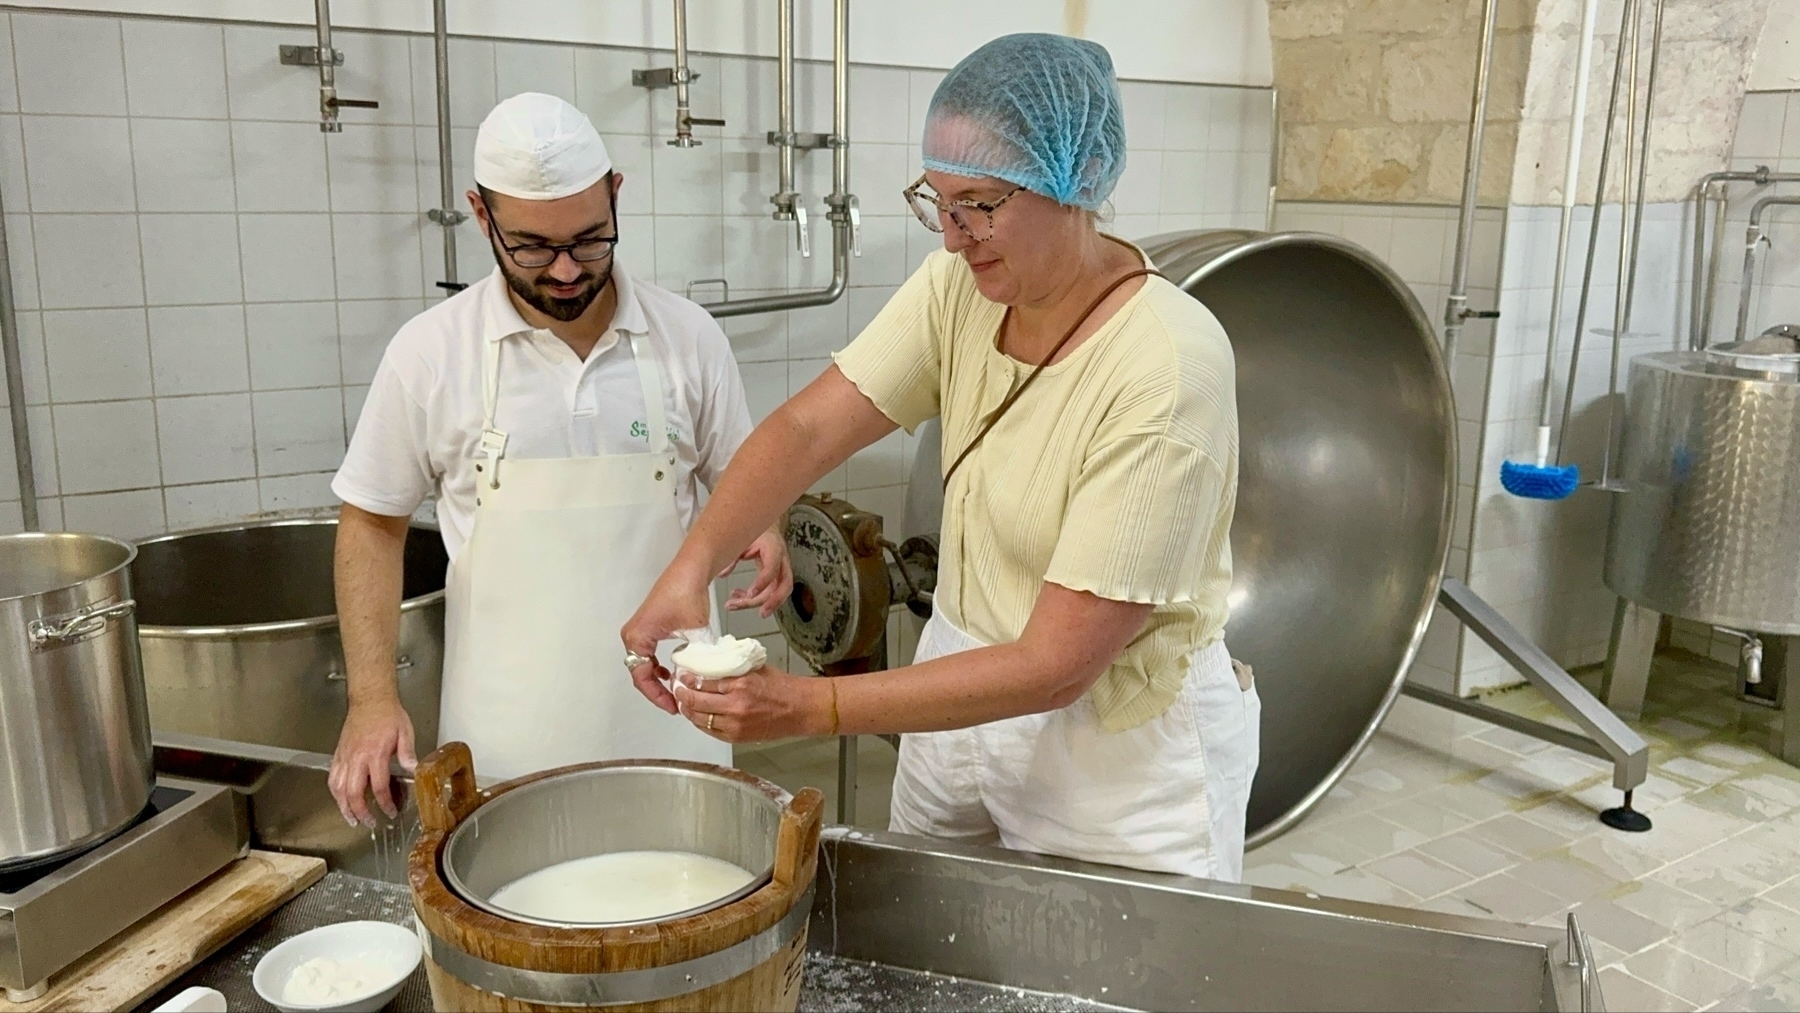 Two individuals are engaged in a cheesemaking process in a dairy facility. They are wearing hygienic hairnets and aprons. One person is pressing curd into a mozzarella ball over a wooden vat filled with milk, while the other observes.